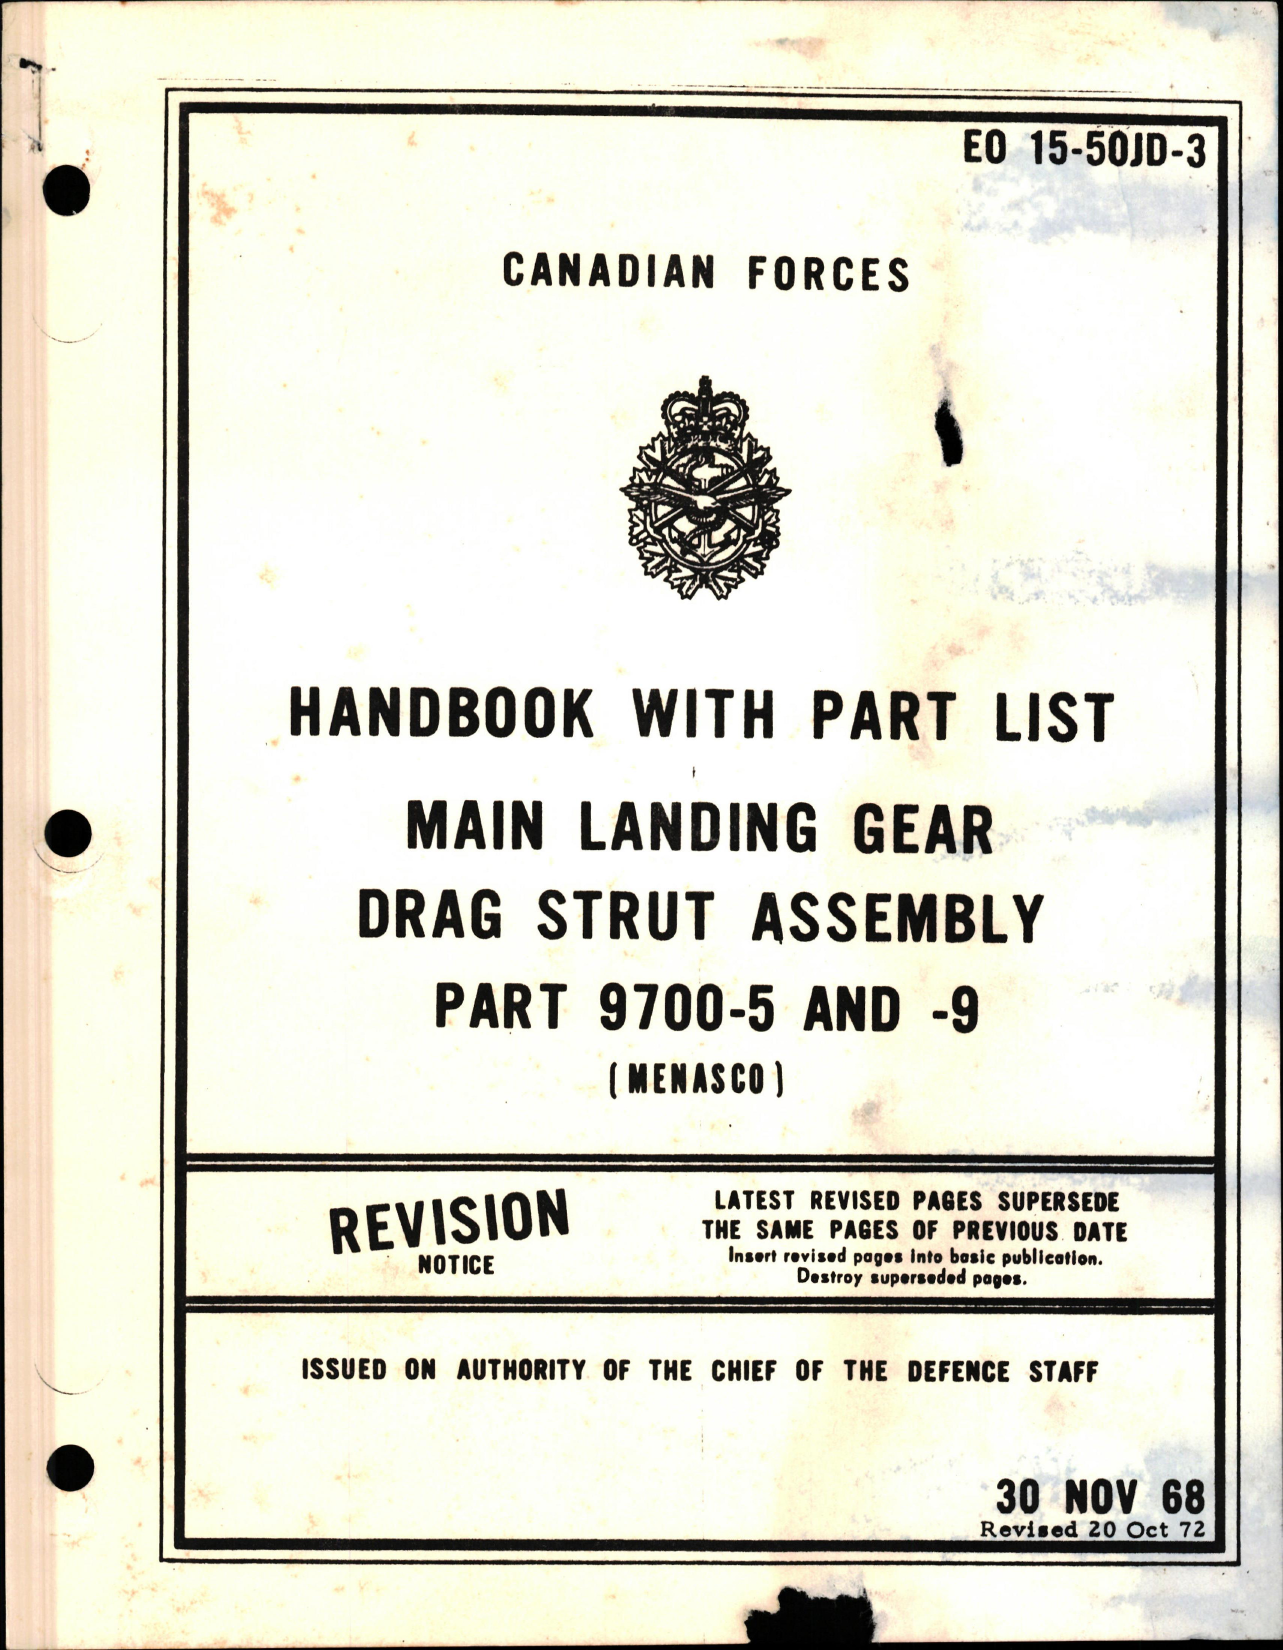 Sample page 1 from AirCorps Library document: Parts List for Main Landing Gear Drag Strut Assembly - Parts 9700-5 and 9700-9 